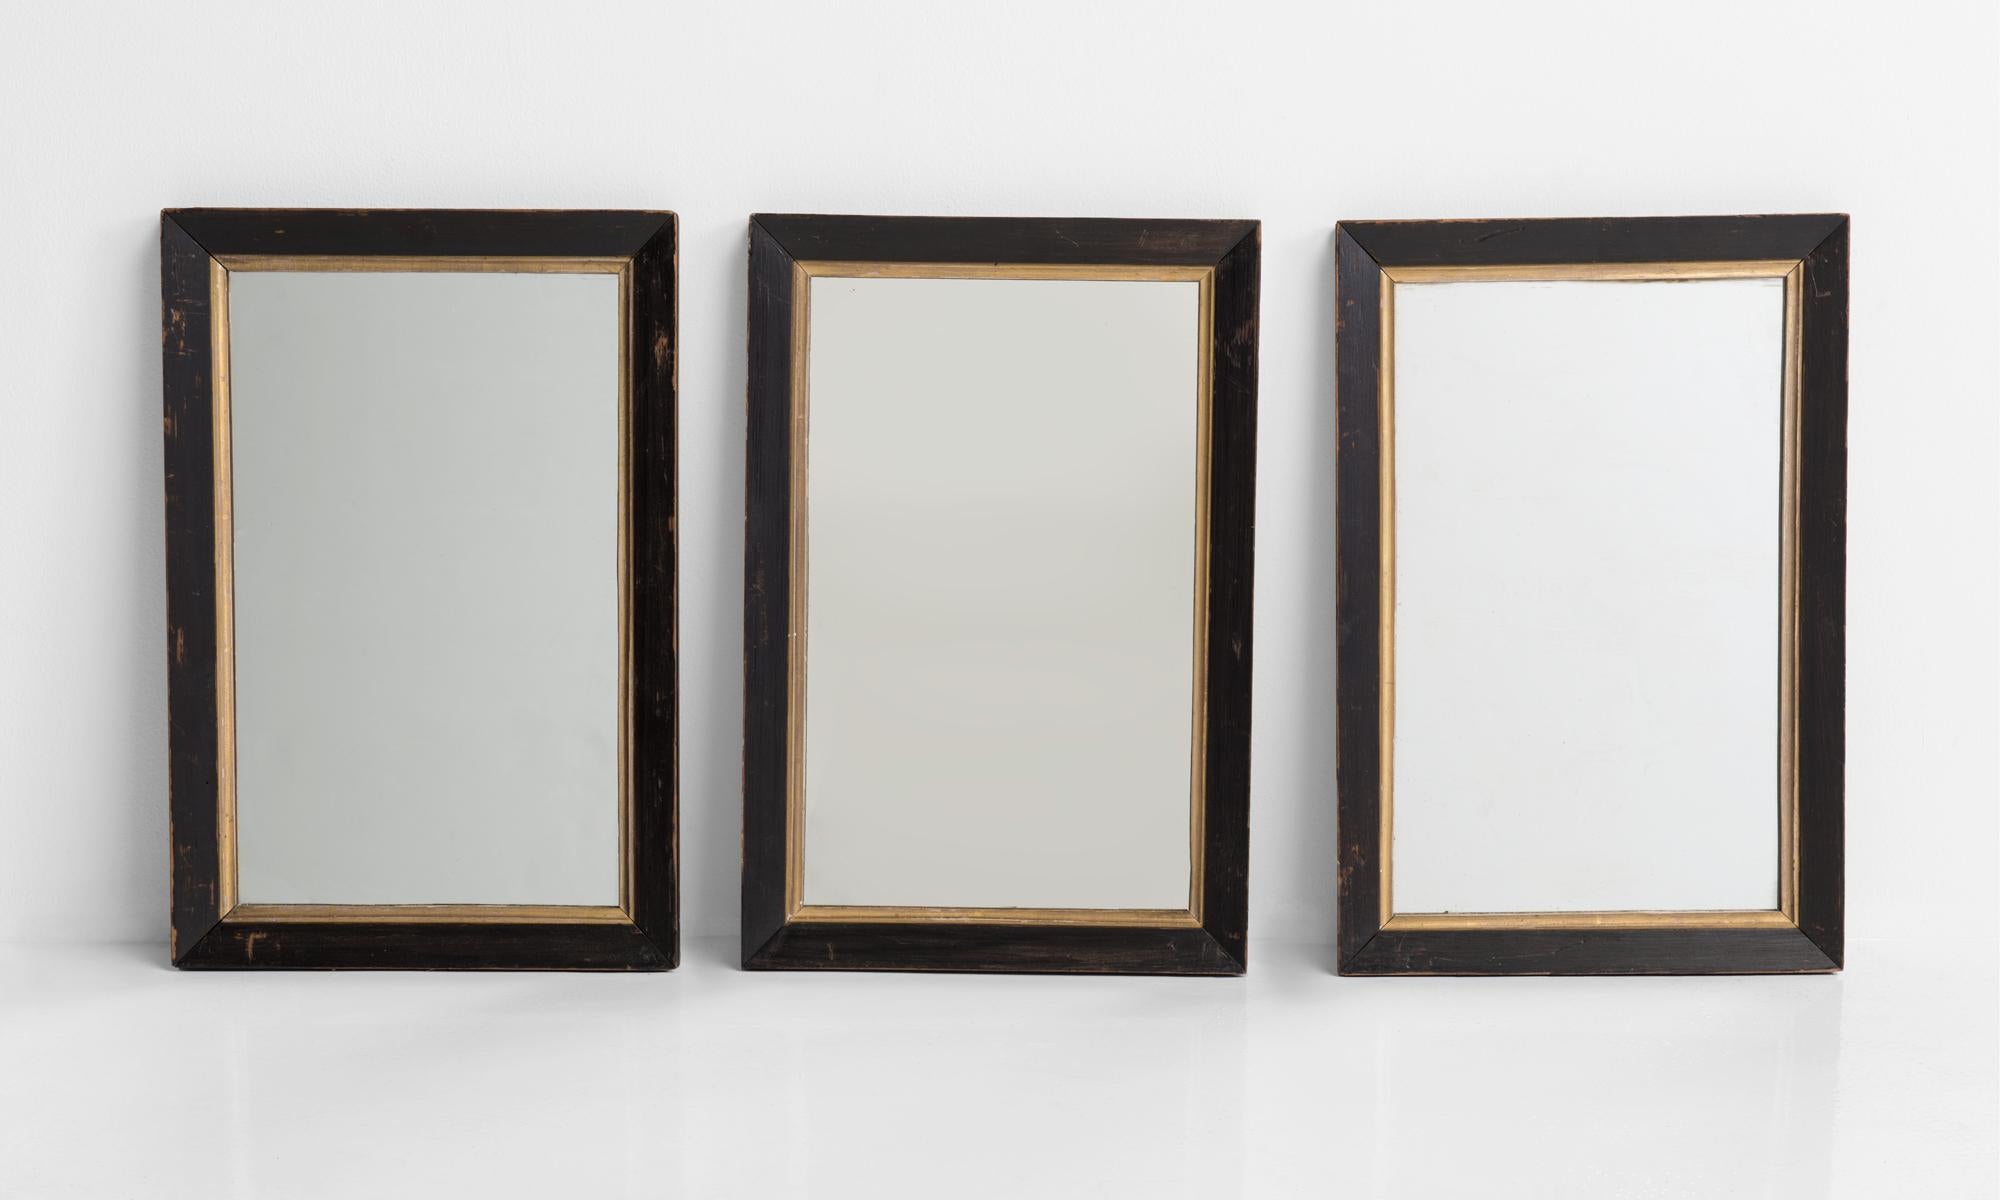 Ebonized and gilt mirrors, England, 19th century.

A beautiful collection of 10 small mirrors. Sold individually. Original ebonized frame with period gilt slips.